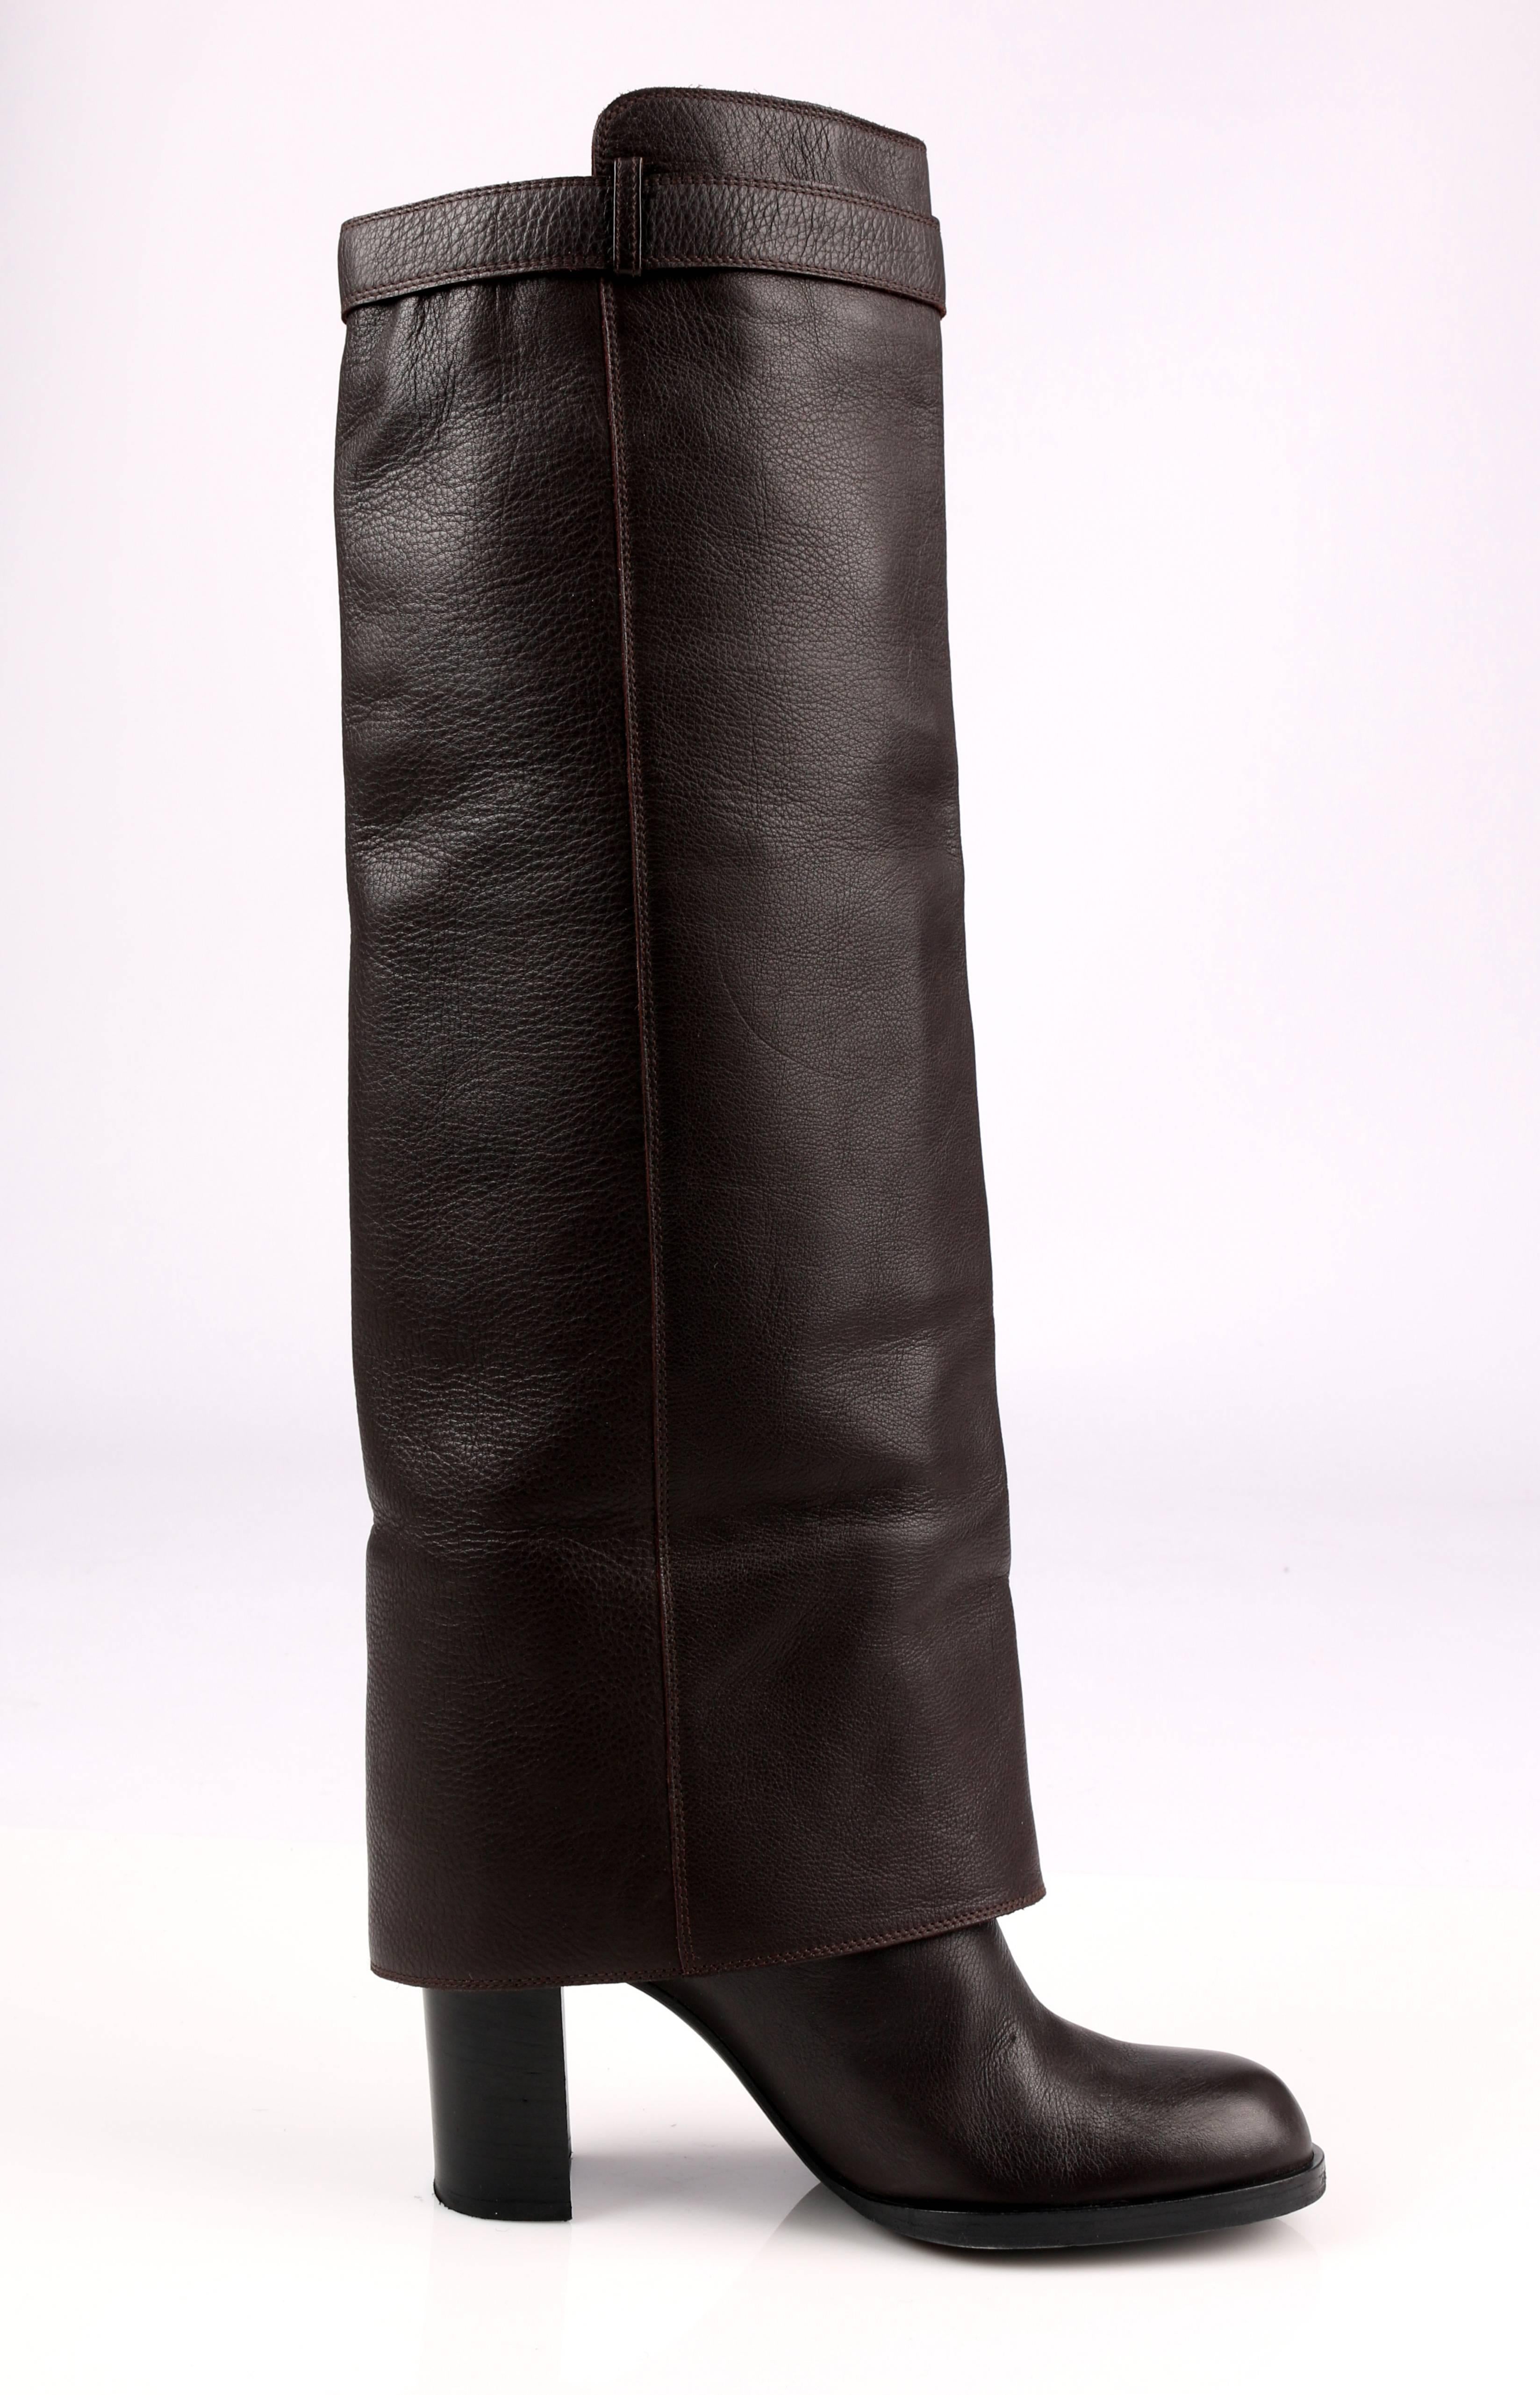 fold over knee high boots